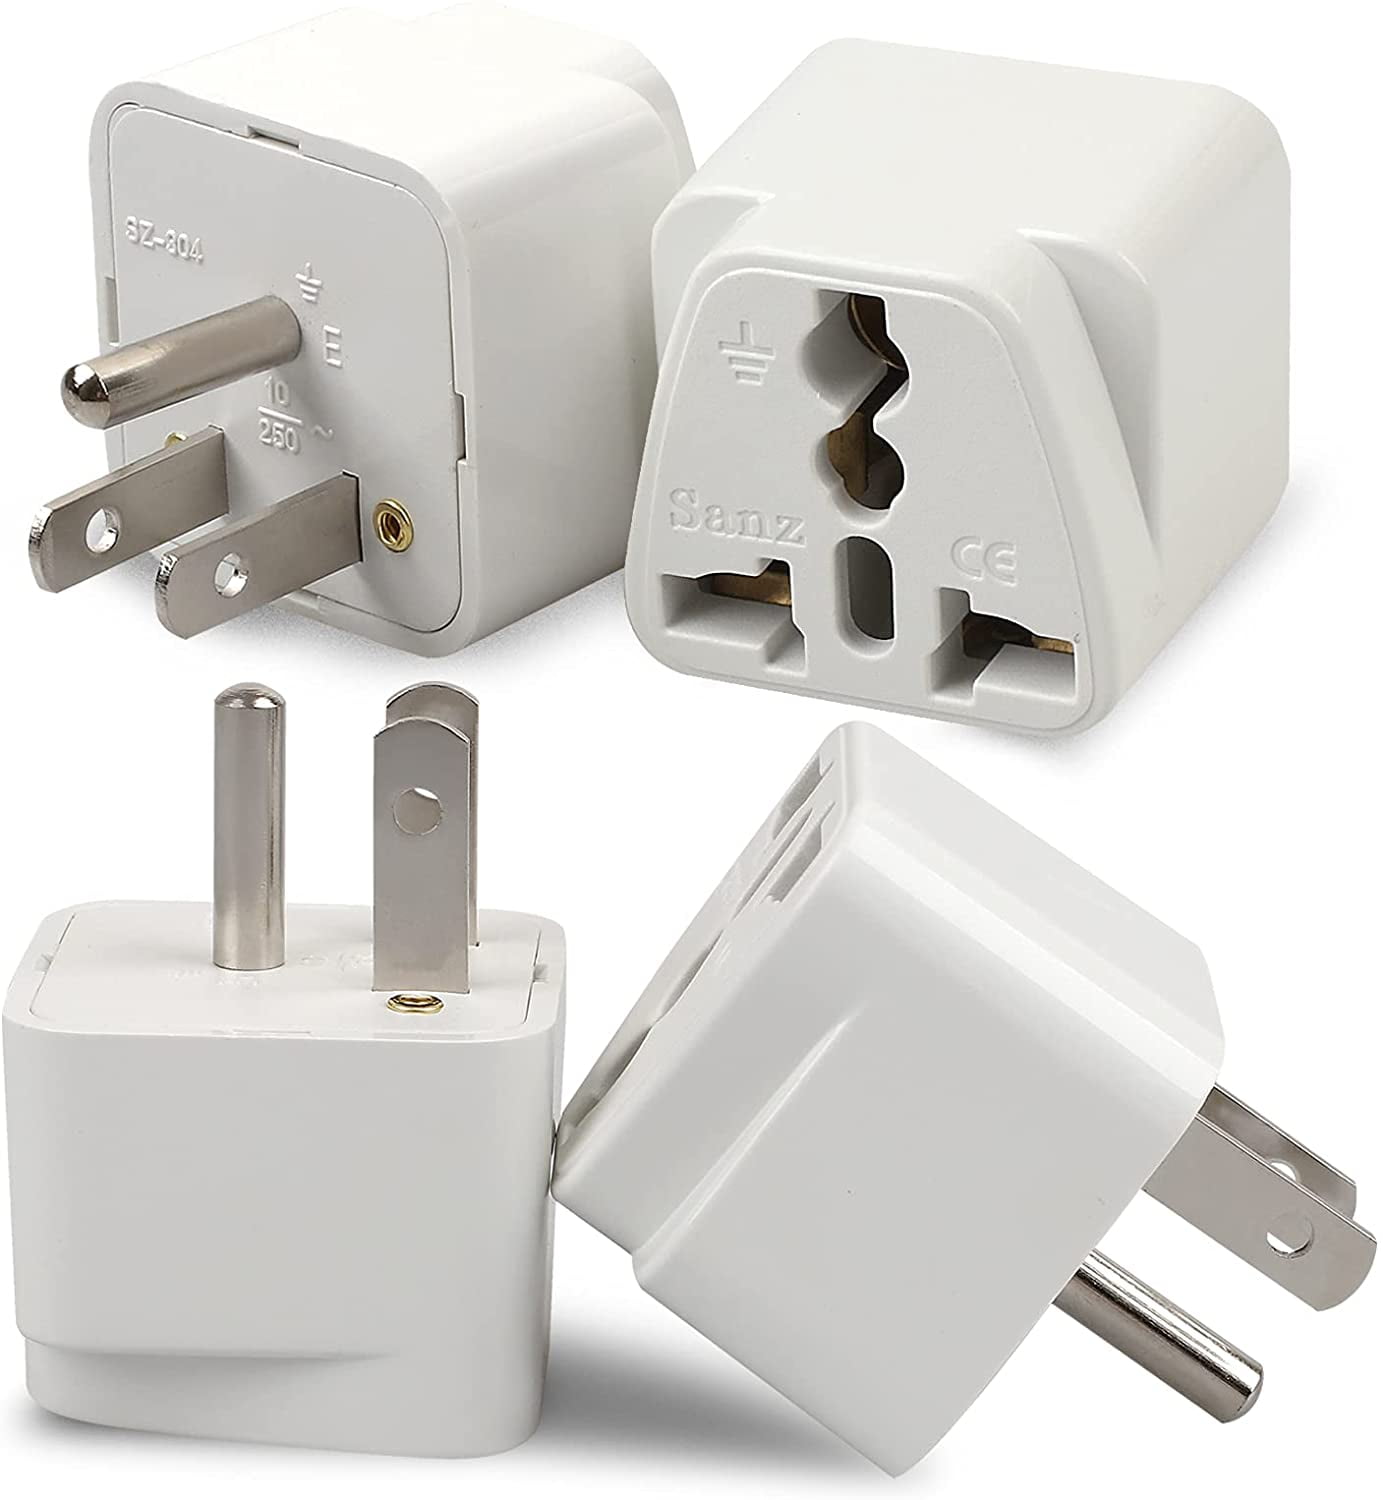 Mijnenveld Getand verkiezing 4 Pack Universal Adapter, UK to US Adapter, Europe to US Plug Adapter,  Travel Adapters, European to USA General Adapter, American Outlet Plug  Adapter (White) - Walmart.com